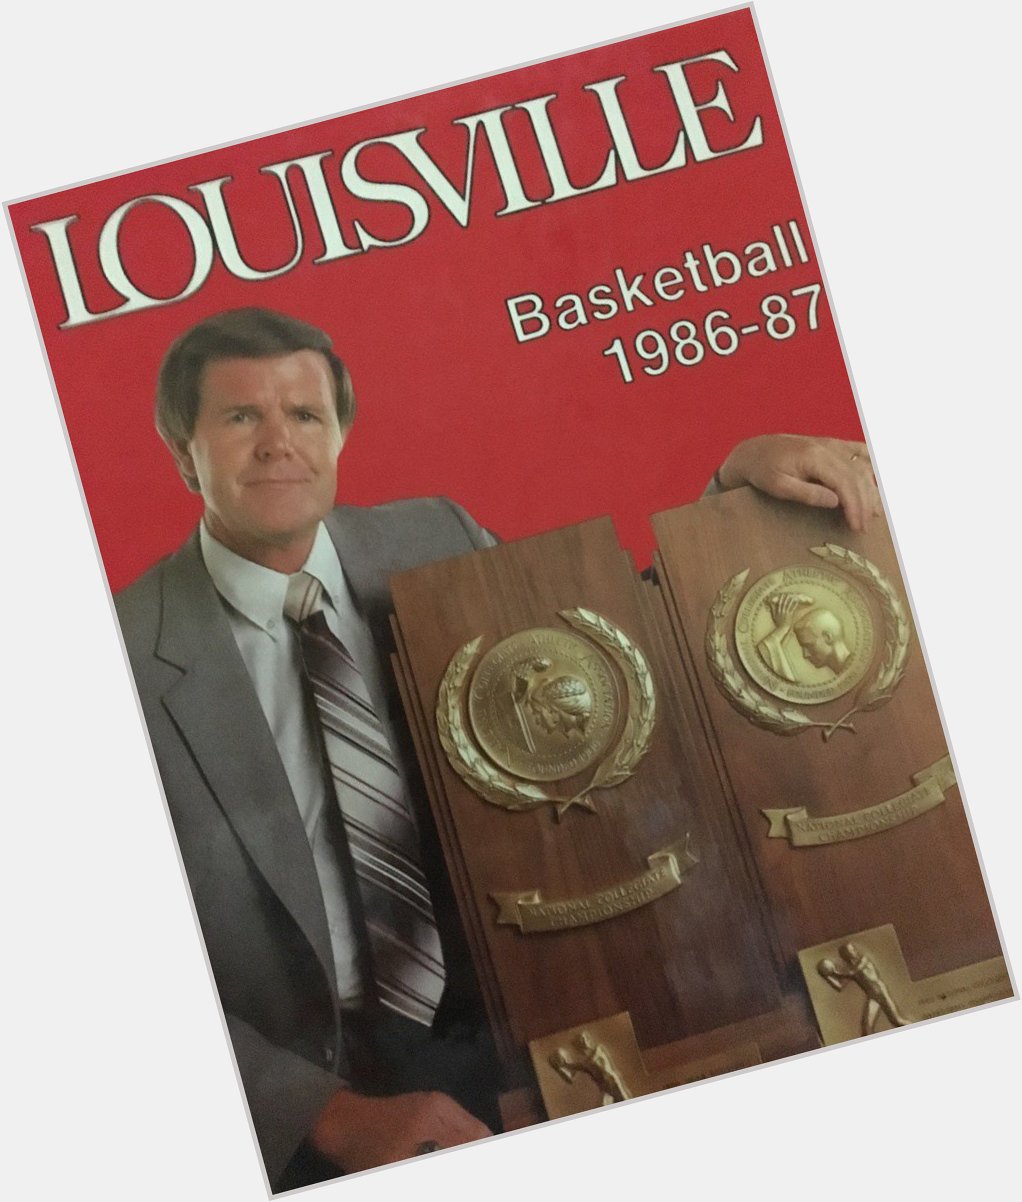 Happy 80th Birthday in-advance (Mar-2) to former Louisville coach Denny Crum. 30-yrs. 6-Final Fours. 2-Masterpieces! 